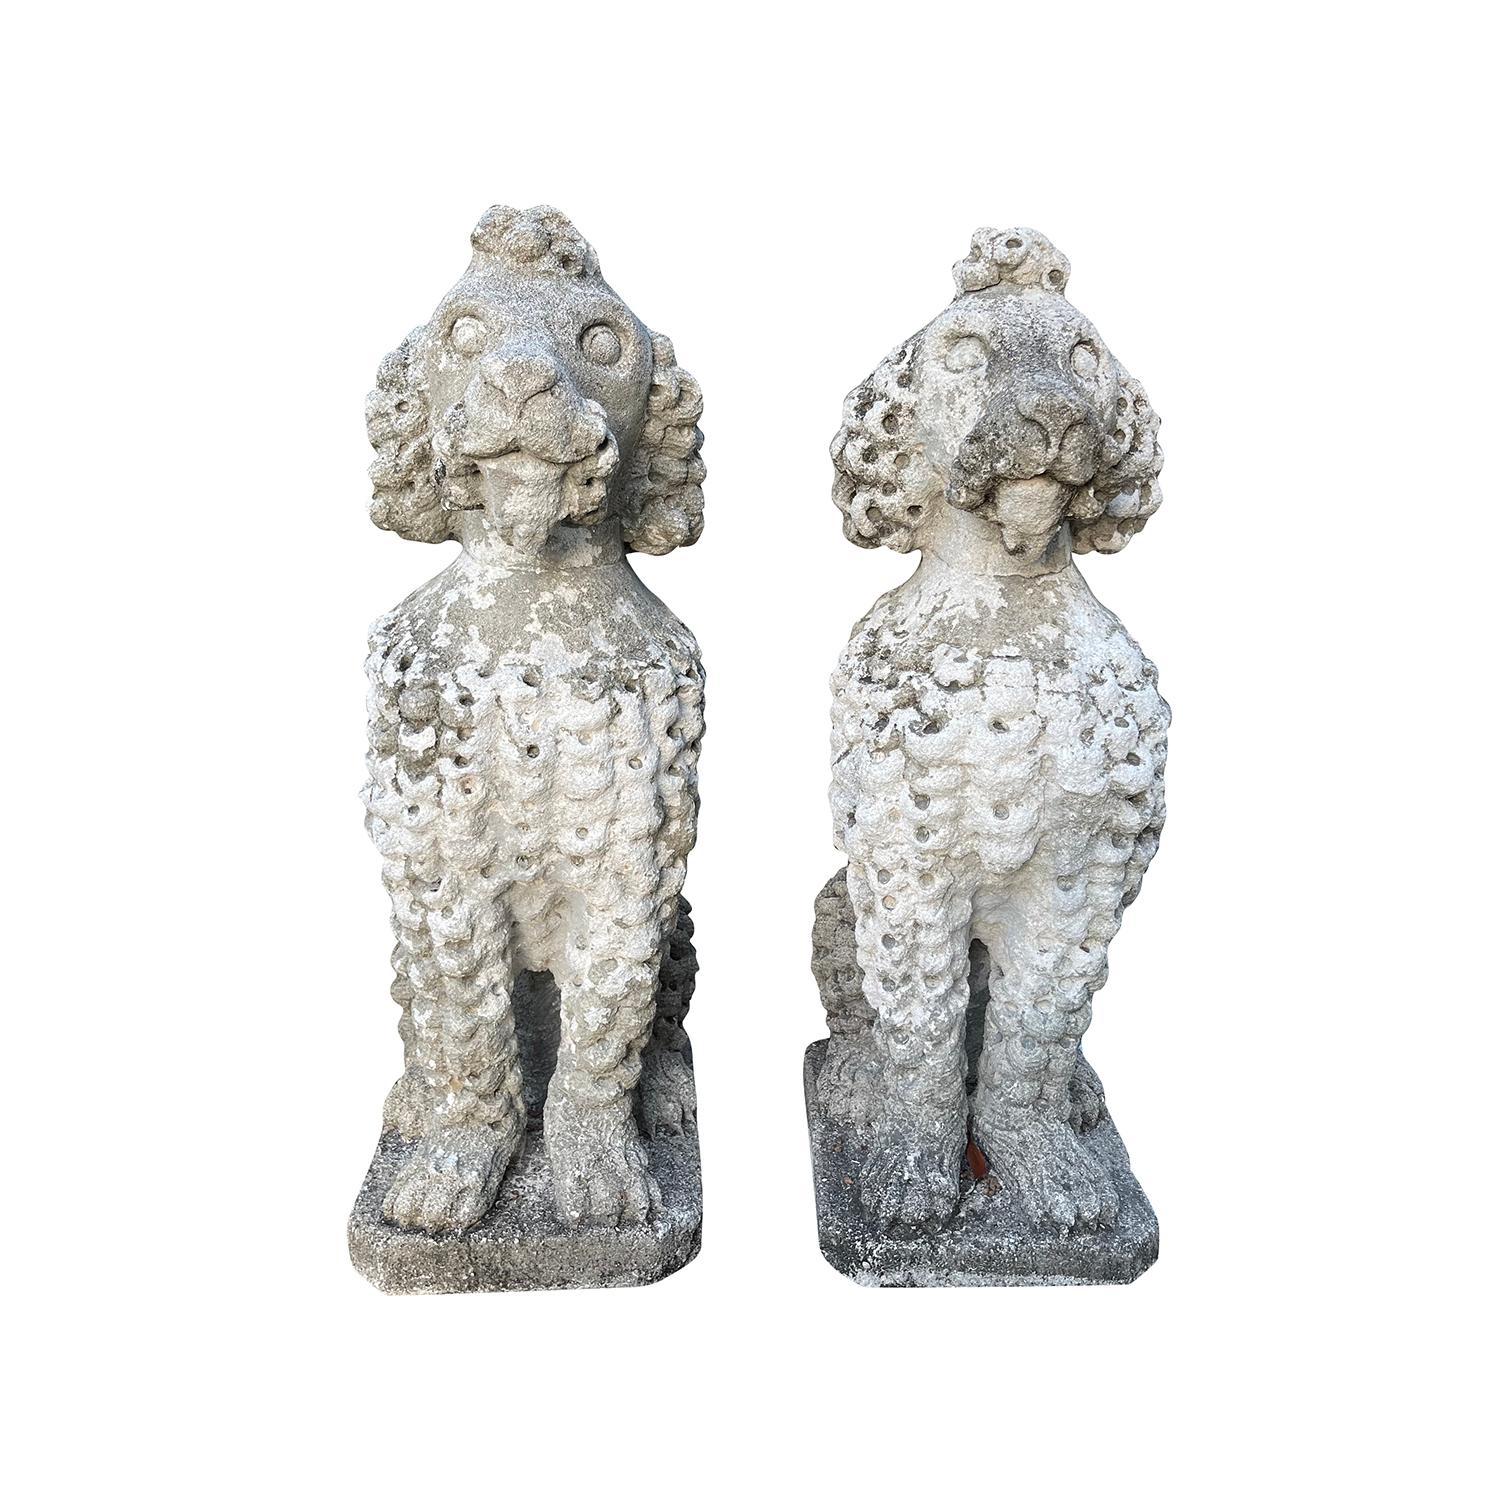 A pair of vintage French poodle garden statues in a seated and attentive position, in good condition. The garden ornaments are hand carved limestone and have a beautiful natural patina. These intricately carved garden dog statuettes can be also used